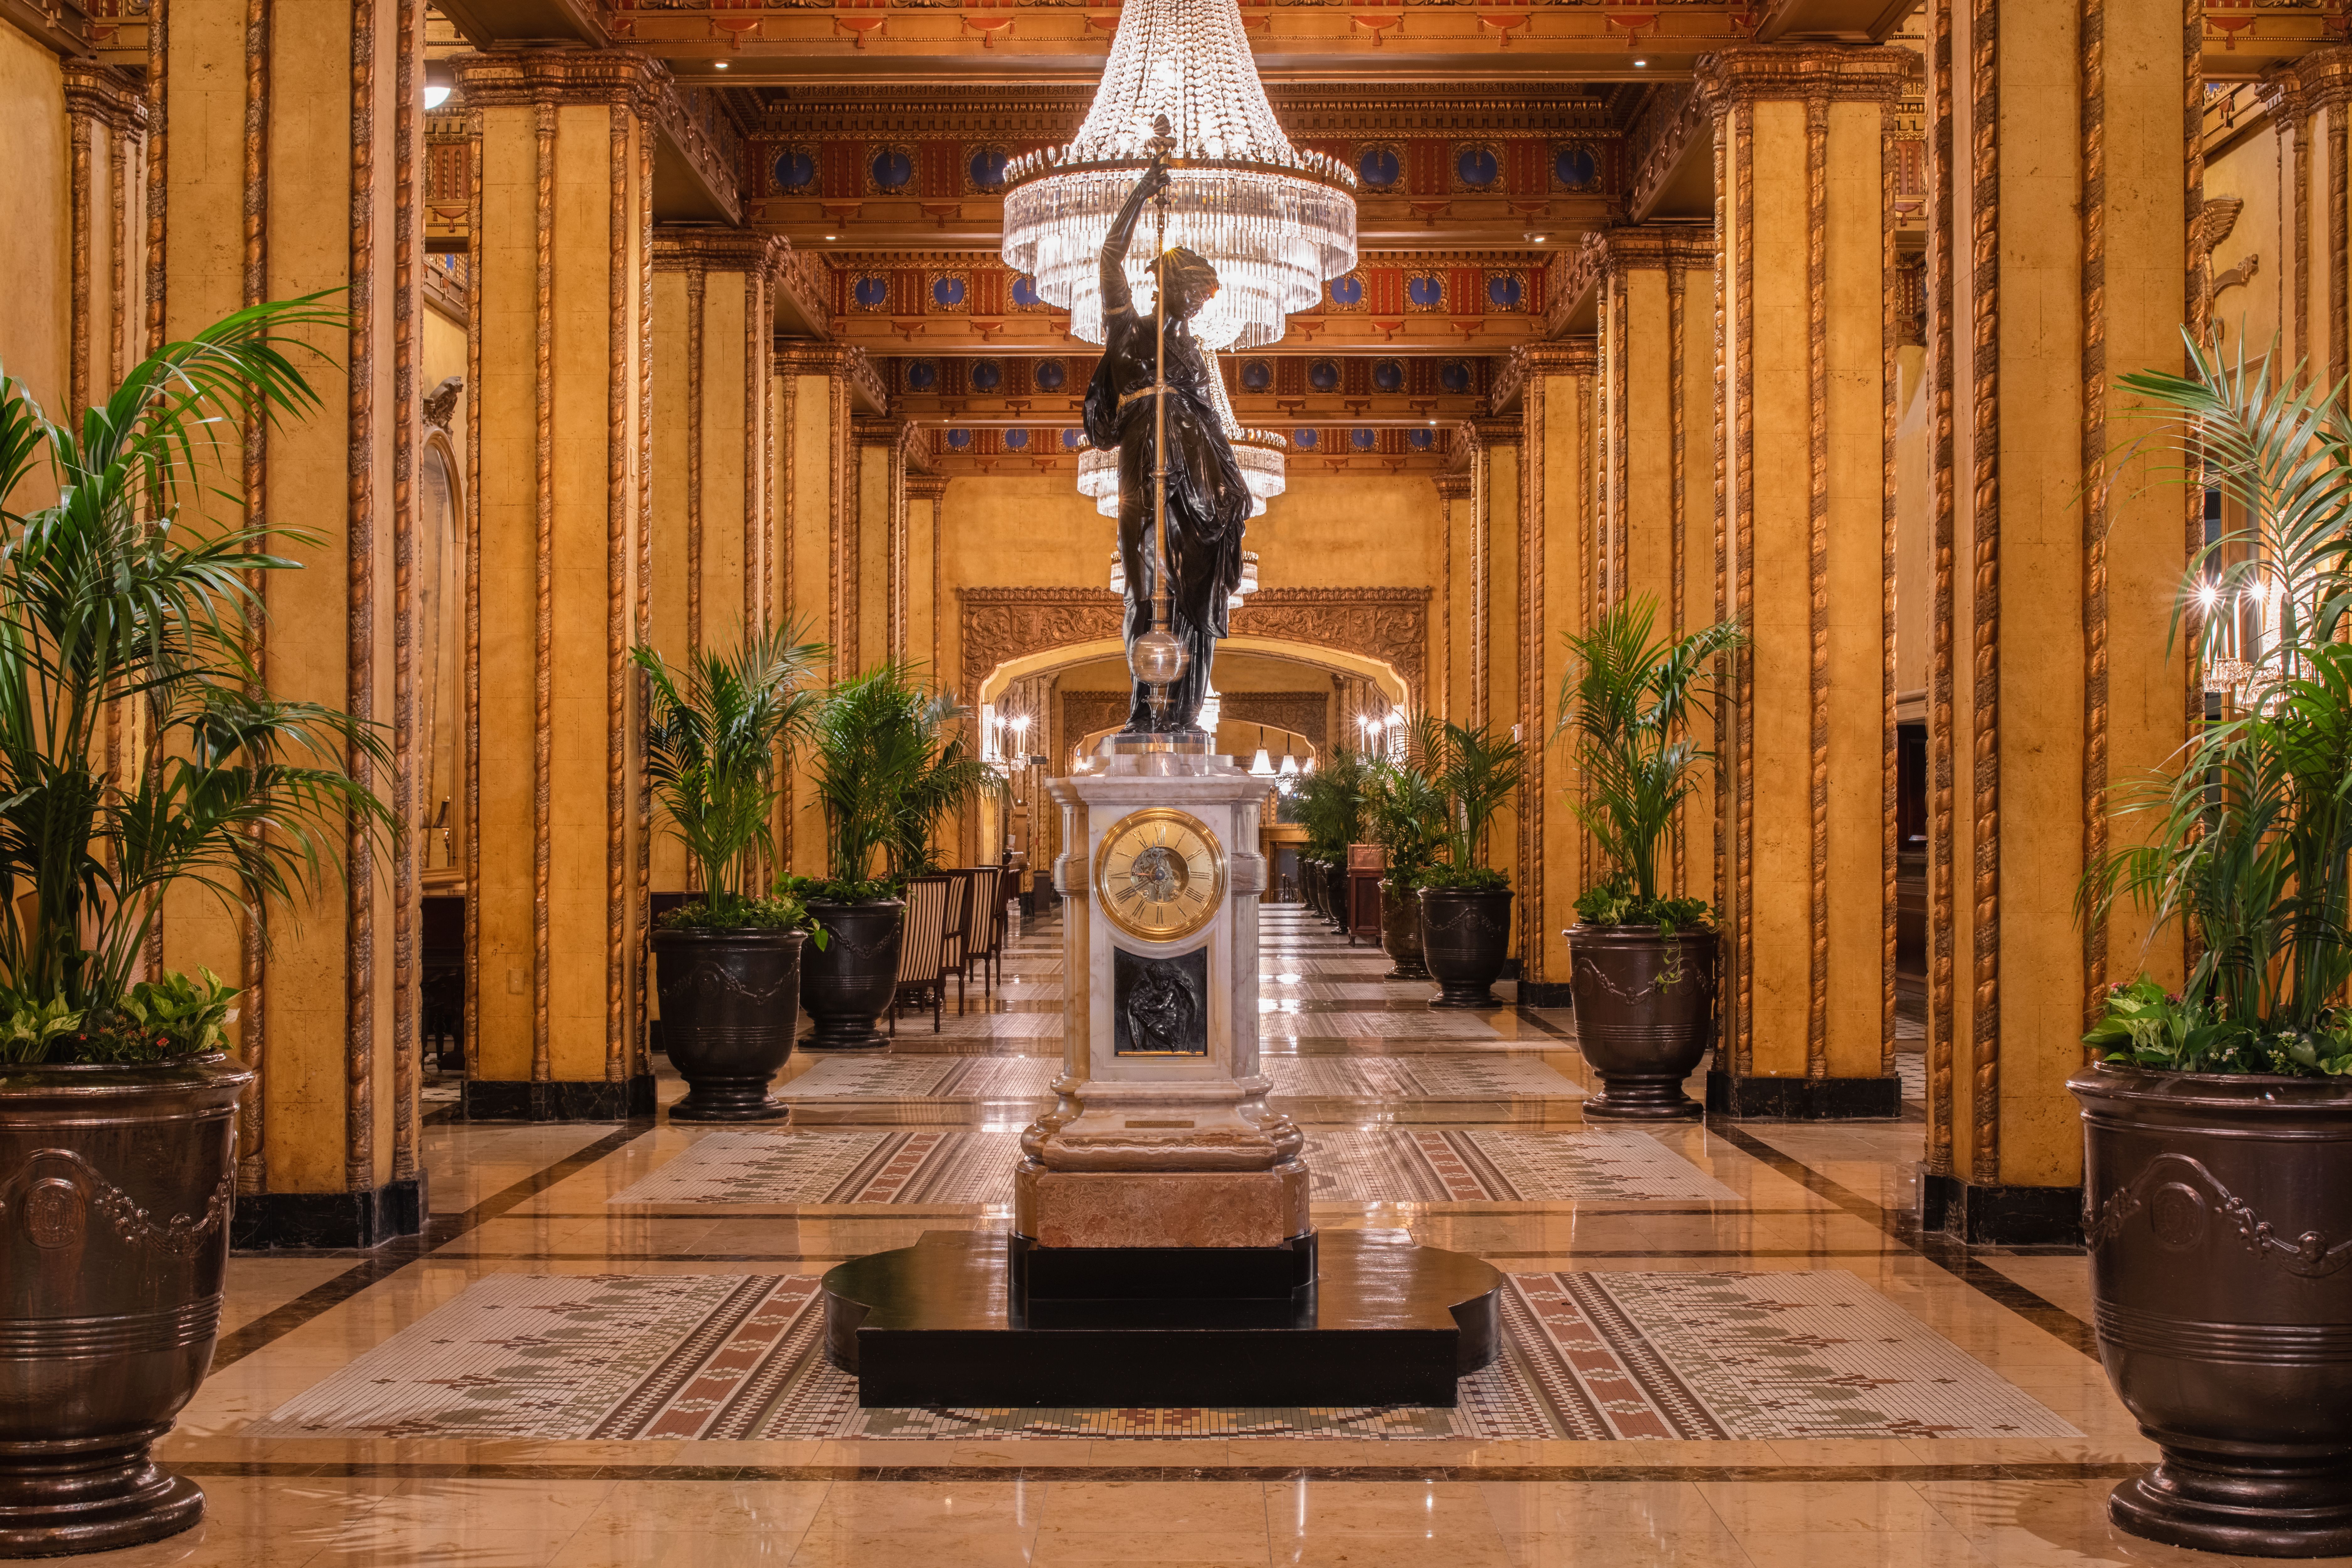 Photo shows the lobby of the Roosevelt by the clock